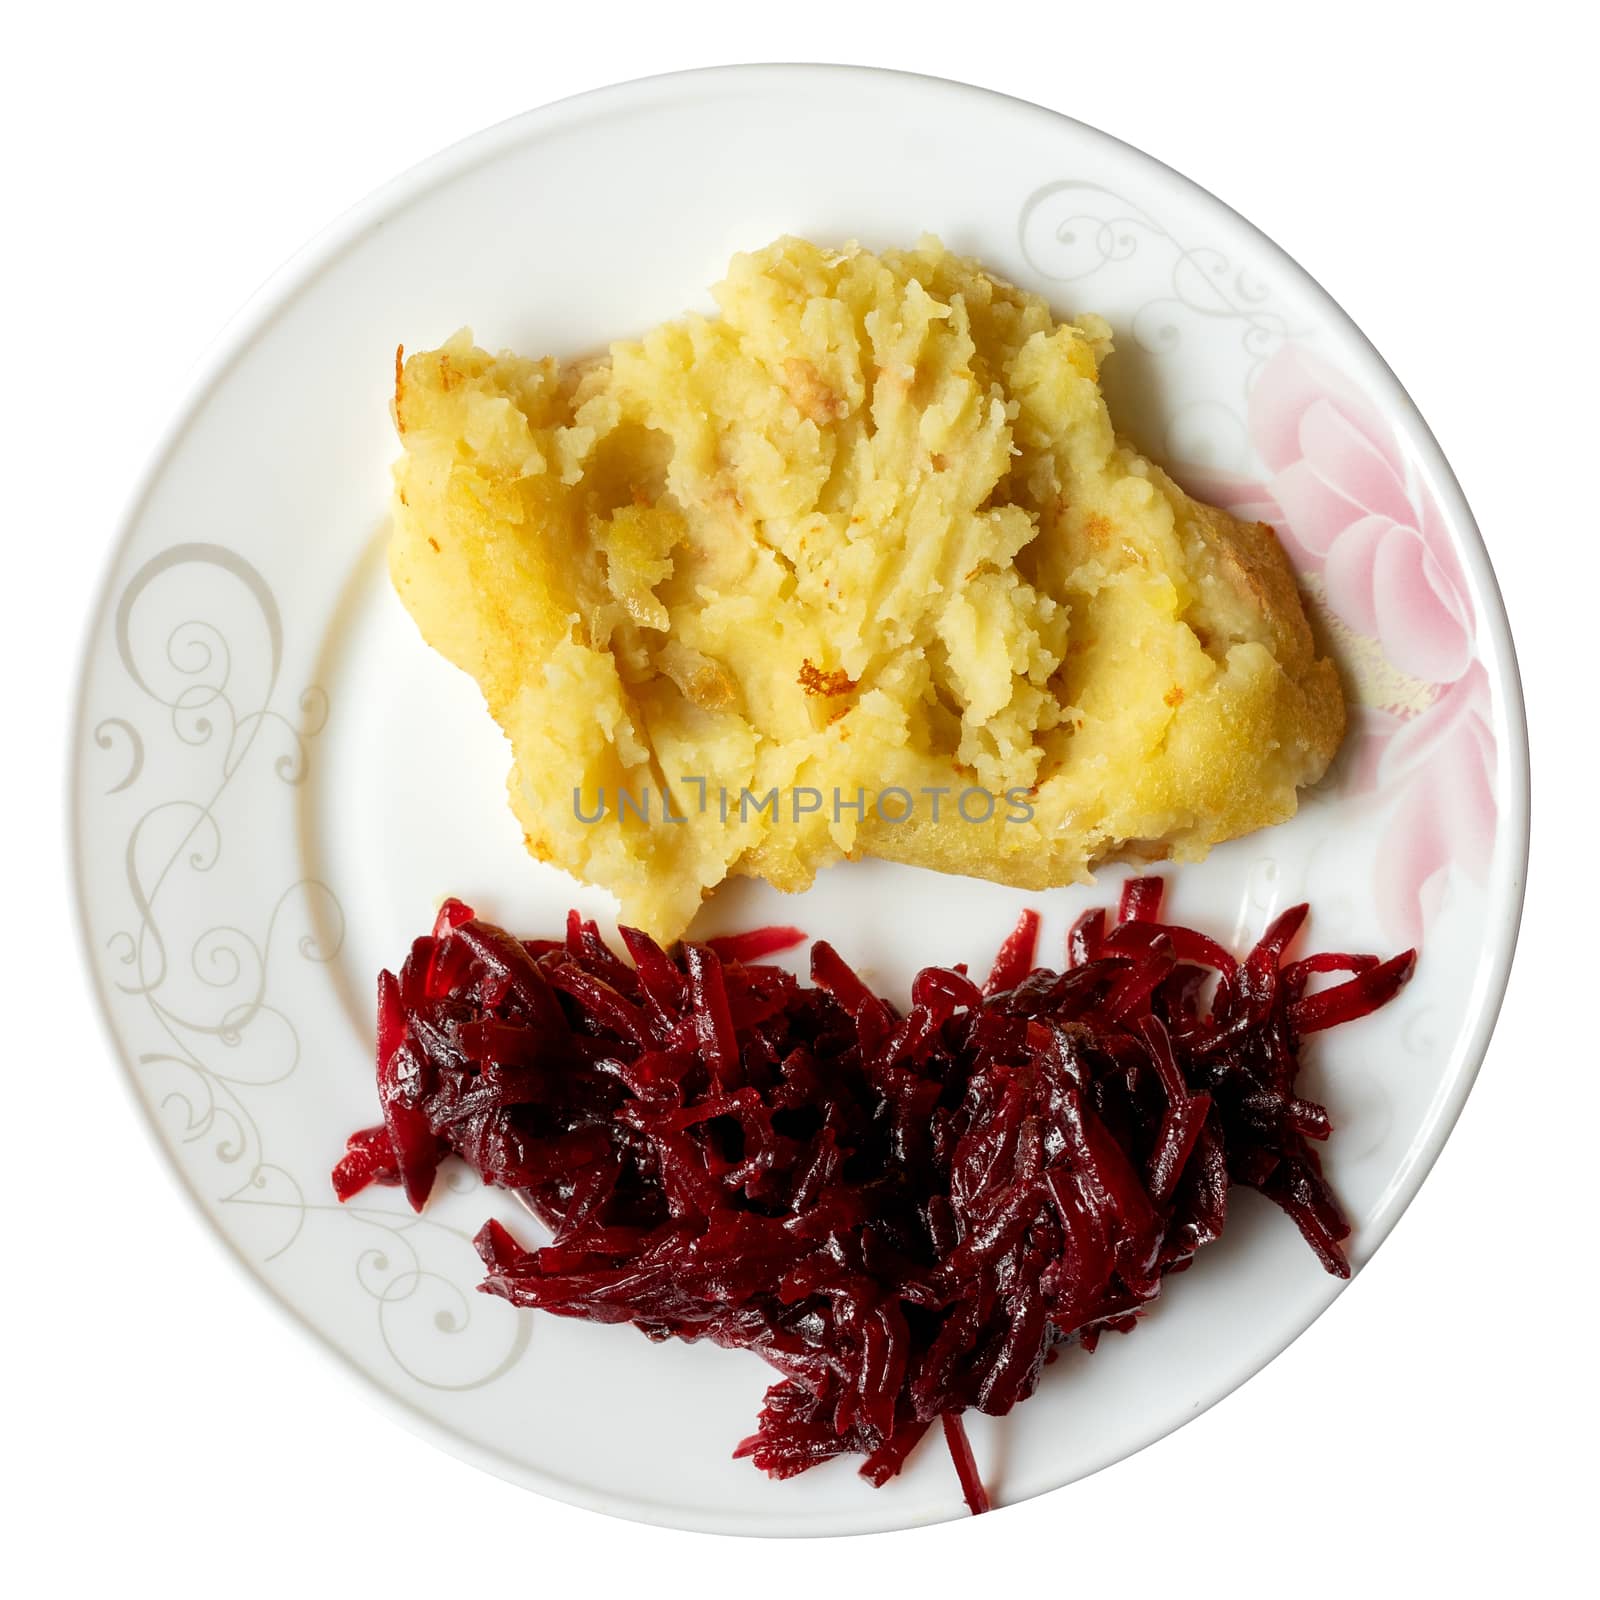 diet food: boiled red beets and mashed potatoes by Serhii_Voroshchuk